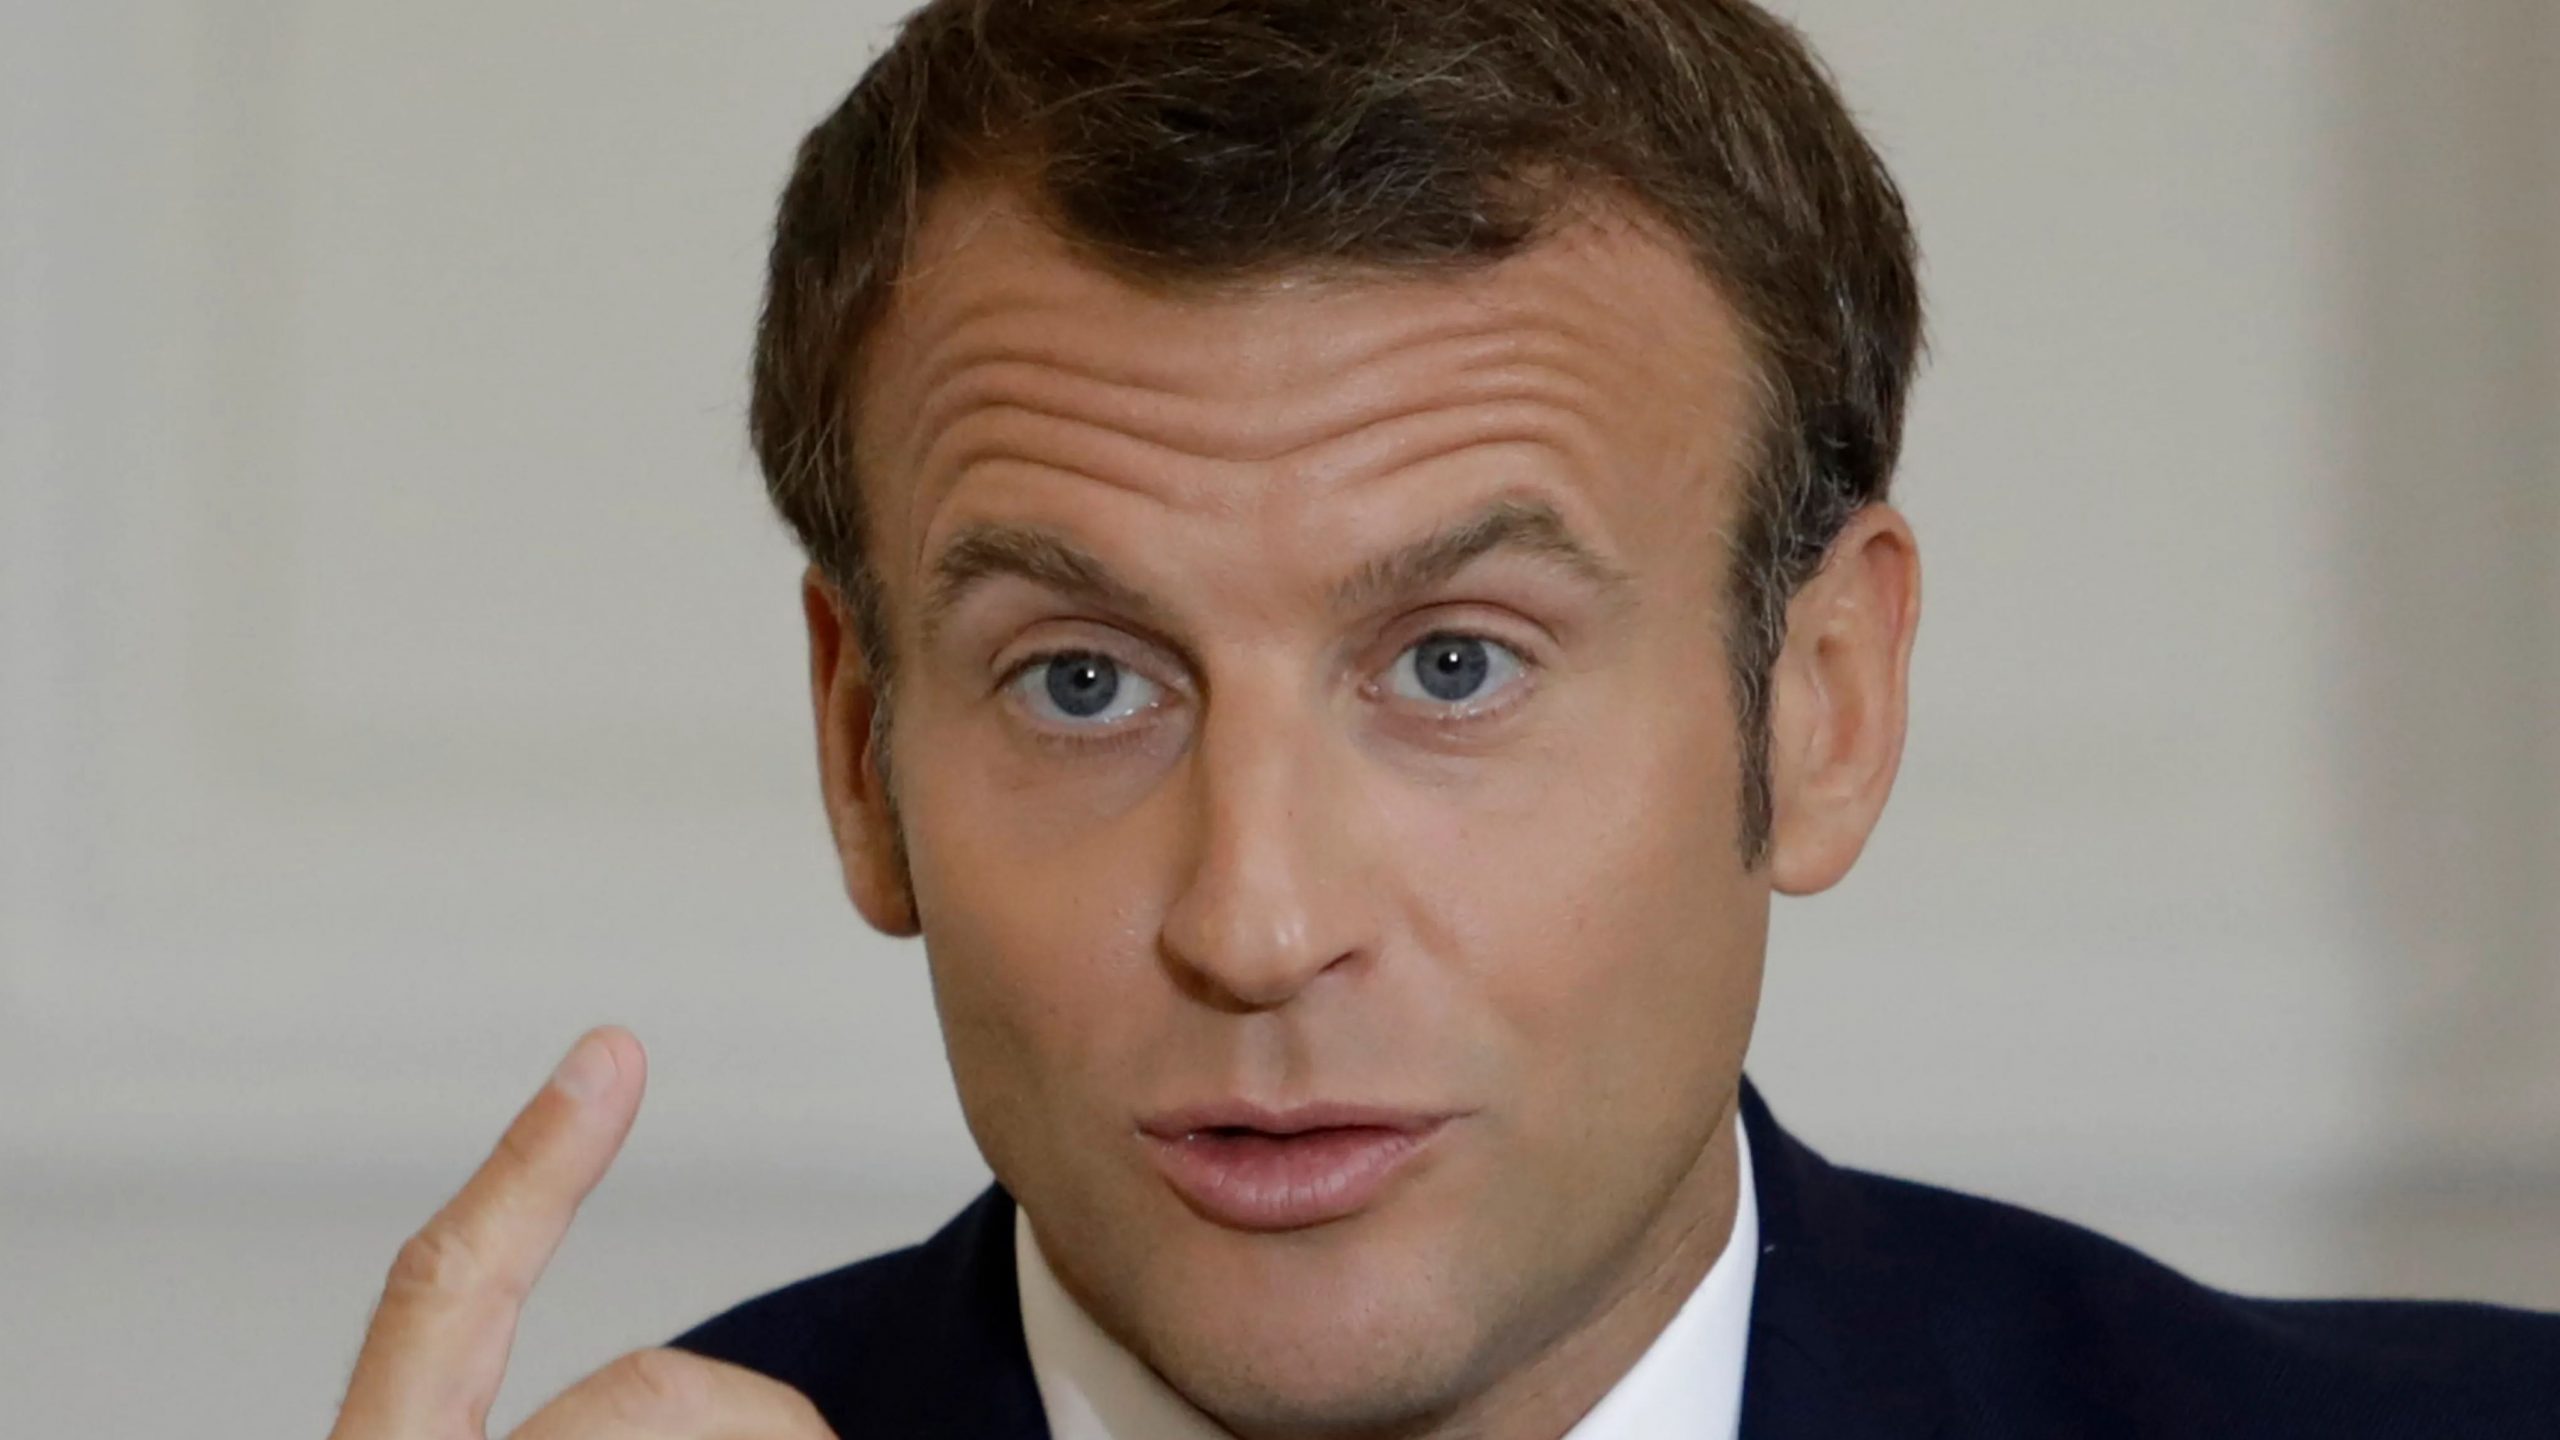 COVID jabs open to all adults from June 15 in France, says President Macron